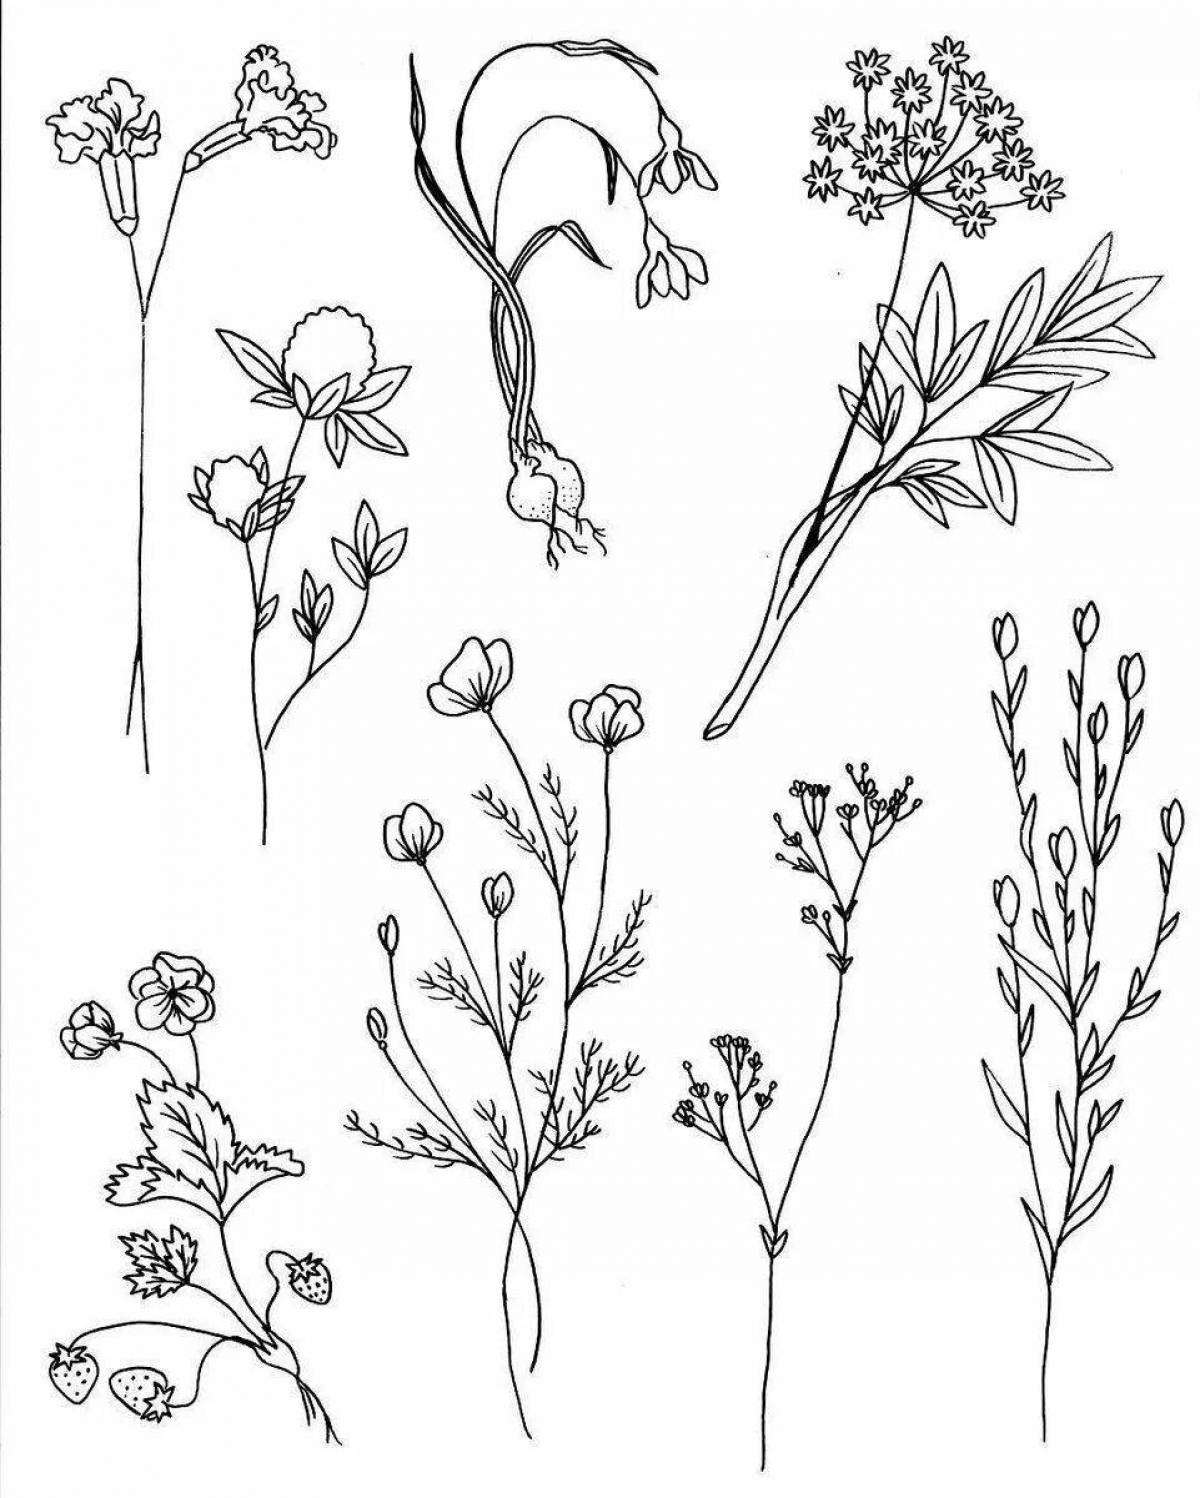 Delightful wild plant coloring pages